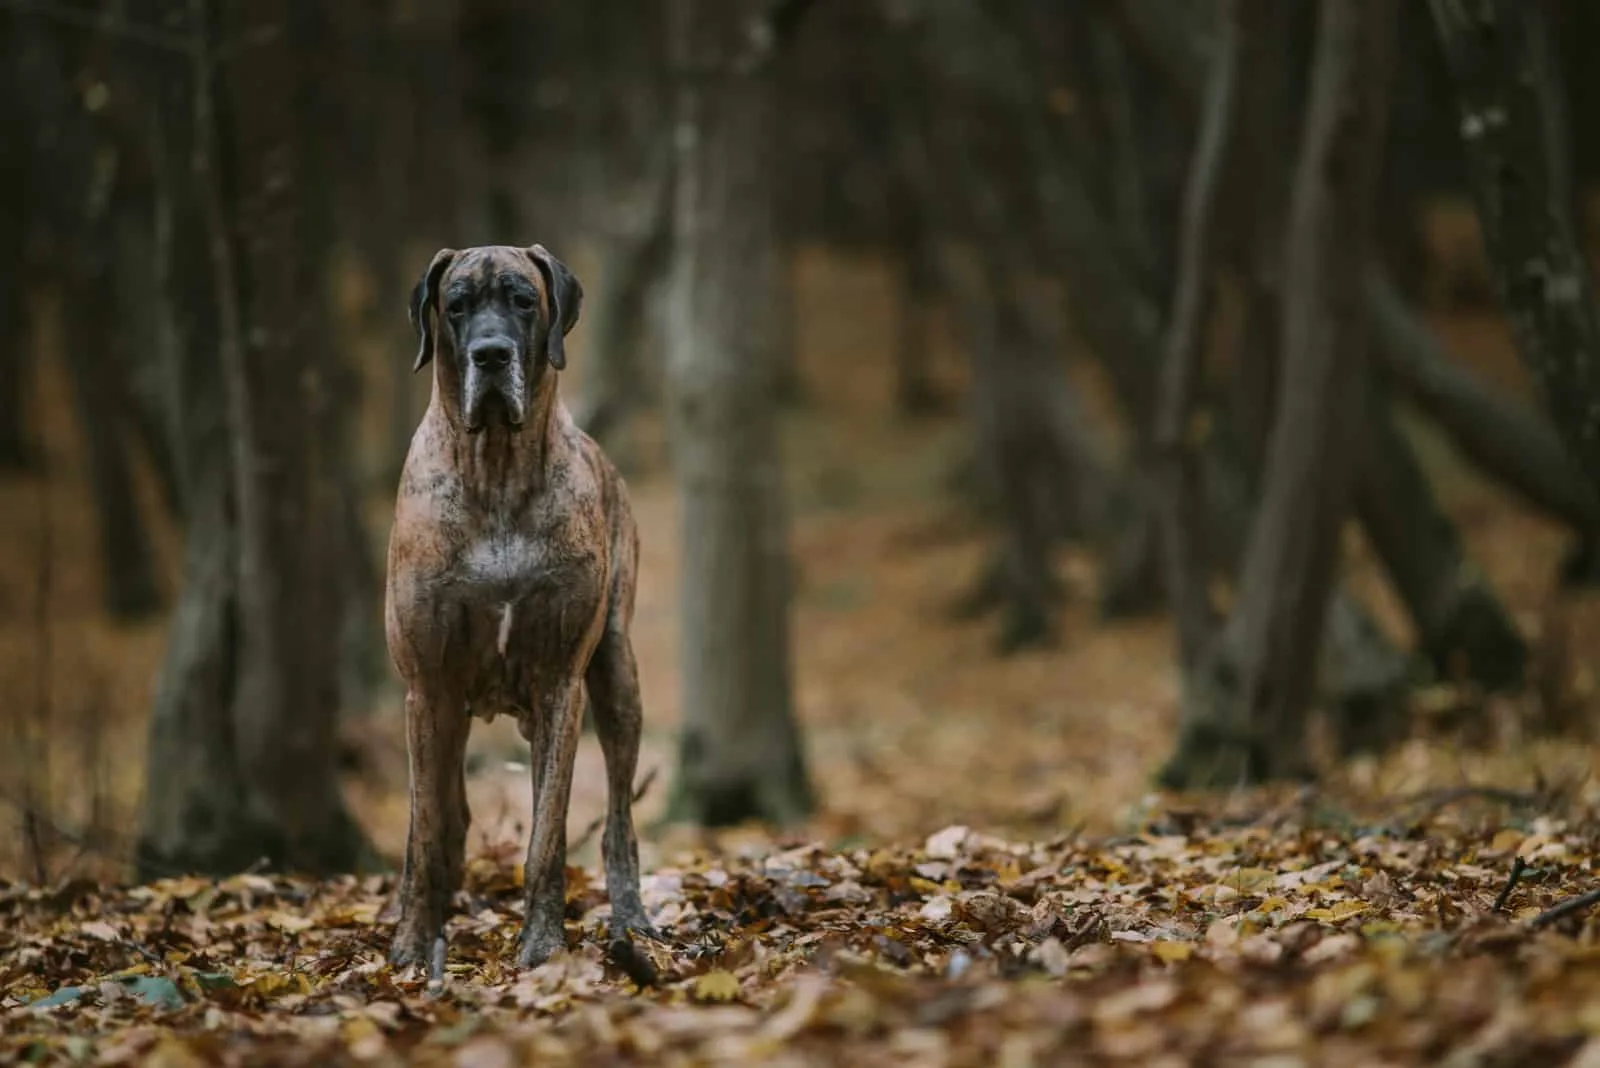 Great dane dog in the forest in autumn